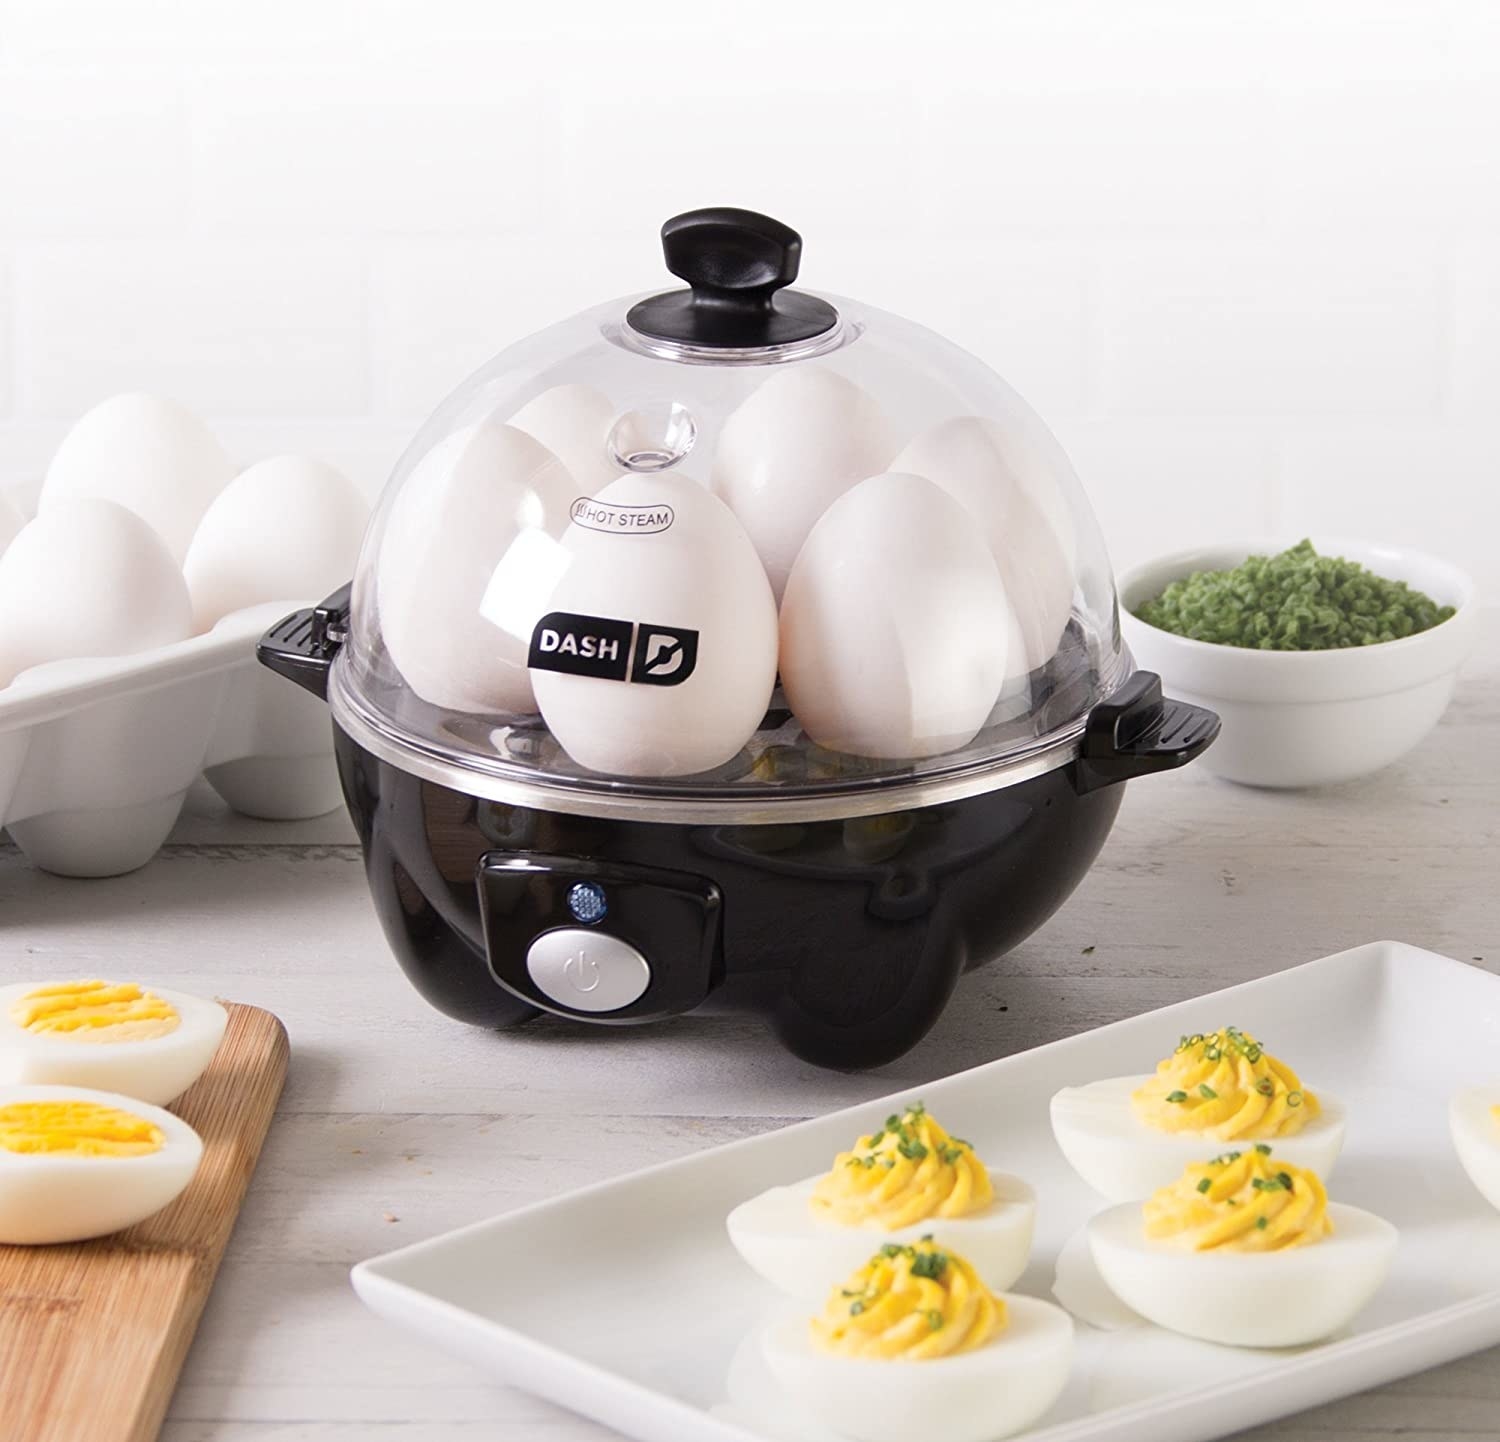 An egg cooking machine with six eggs in it and deviled eggs in the foreground